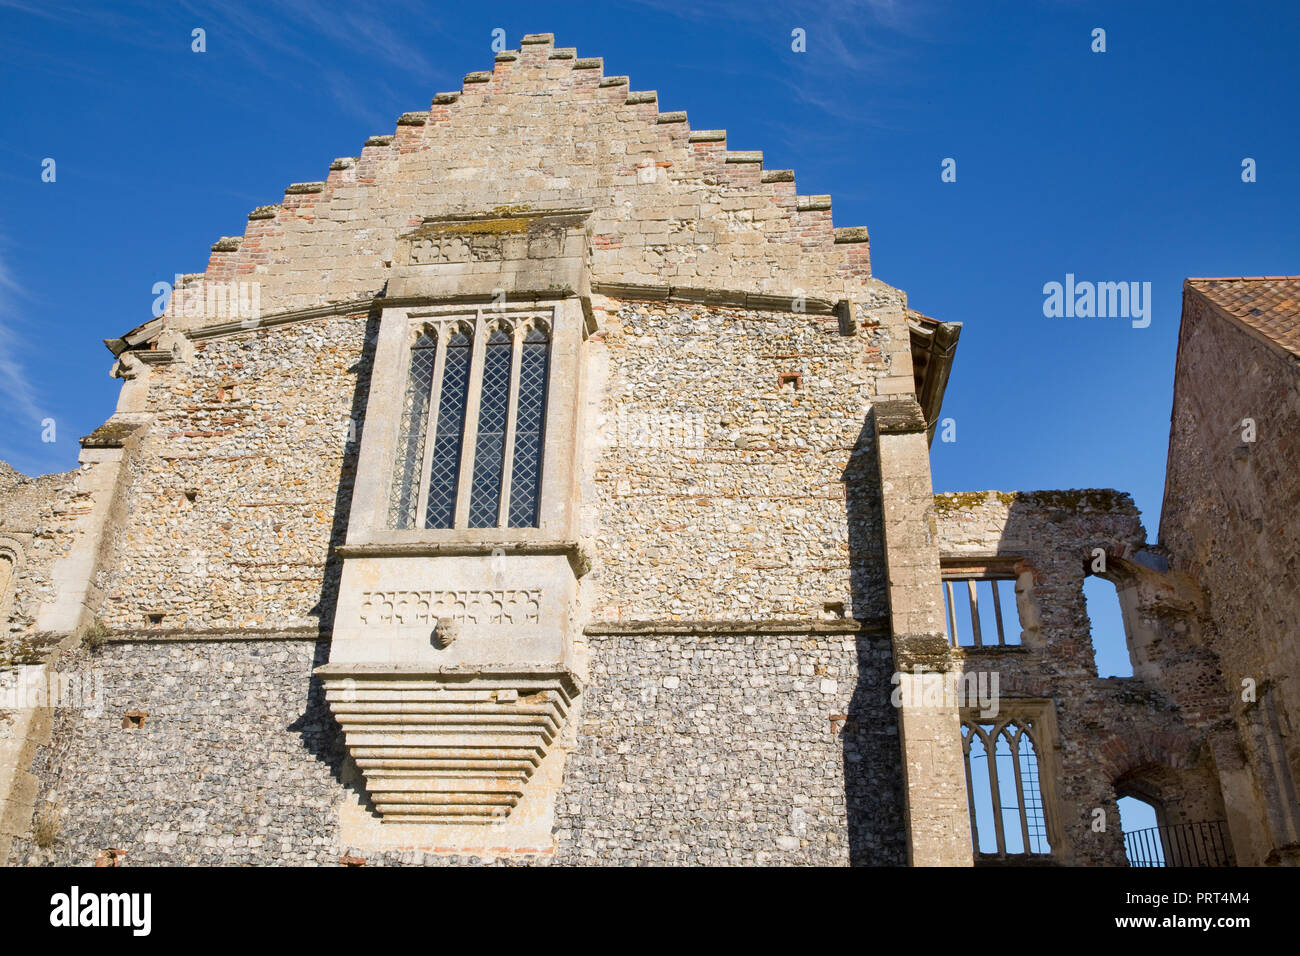 The remains of priory buildings at Castle Acre, Norfolk, United Kingdom. The site ceased to be a monastery in 1537. Stock Photo